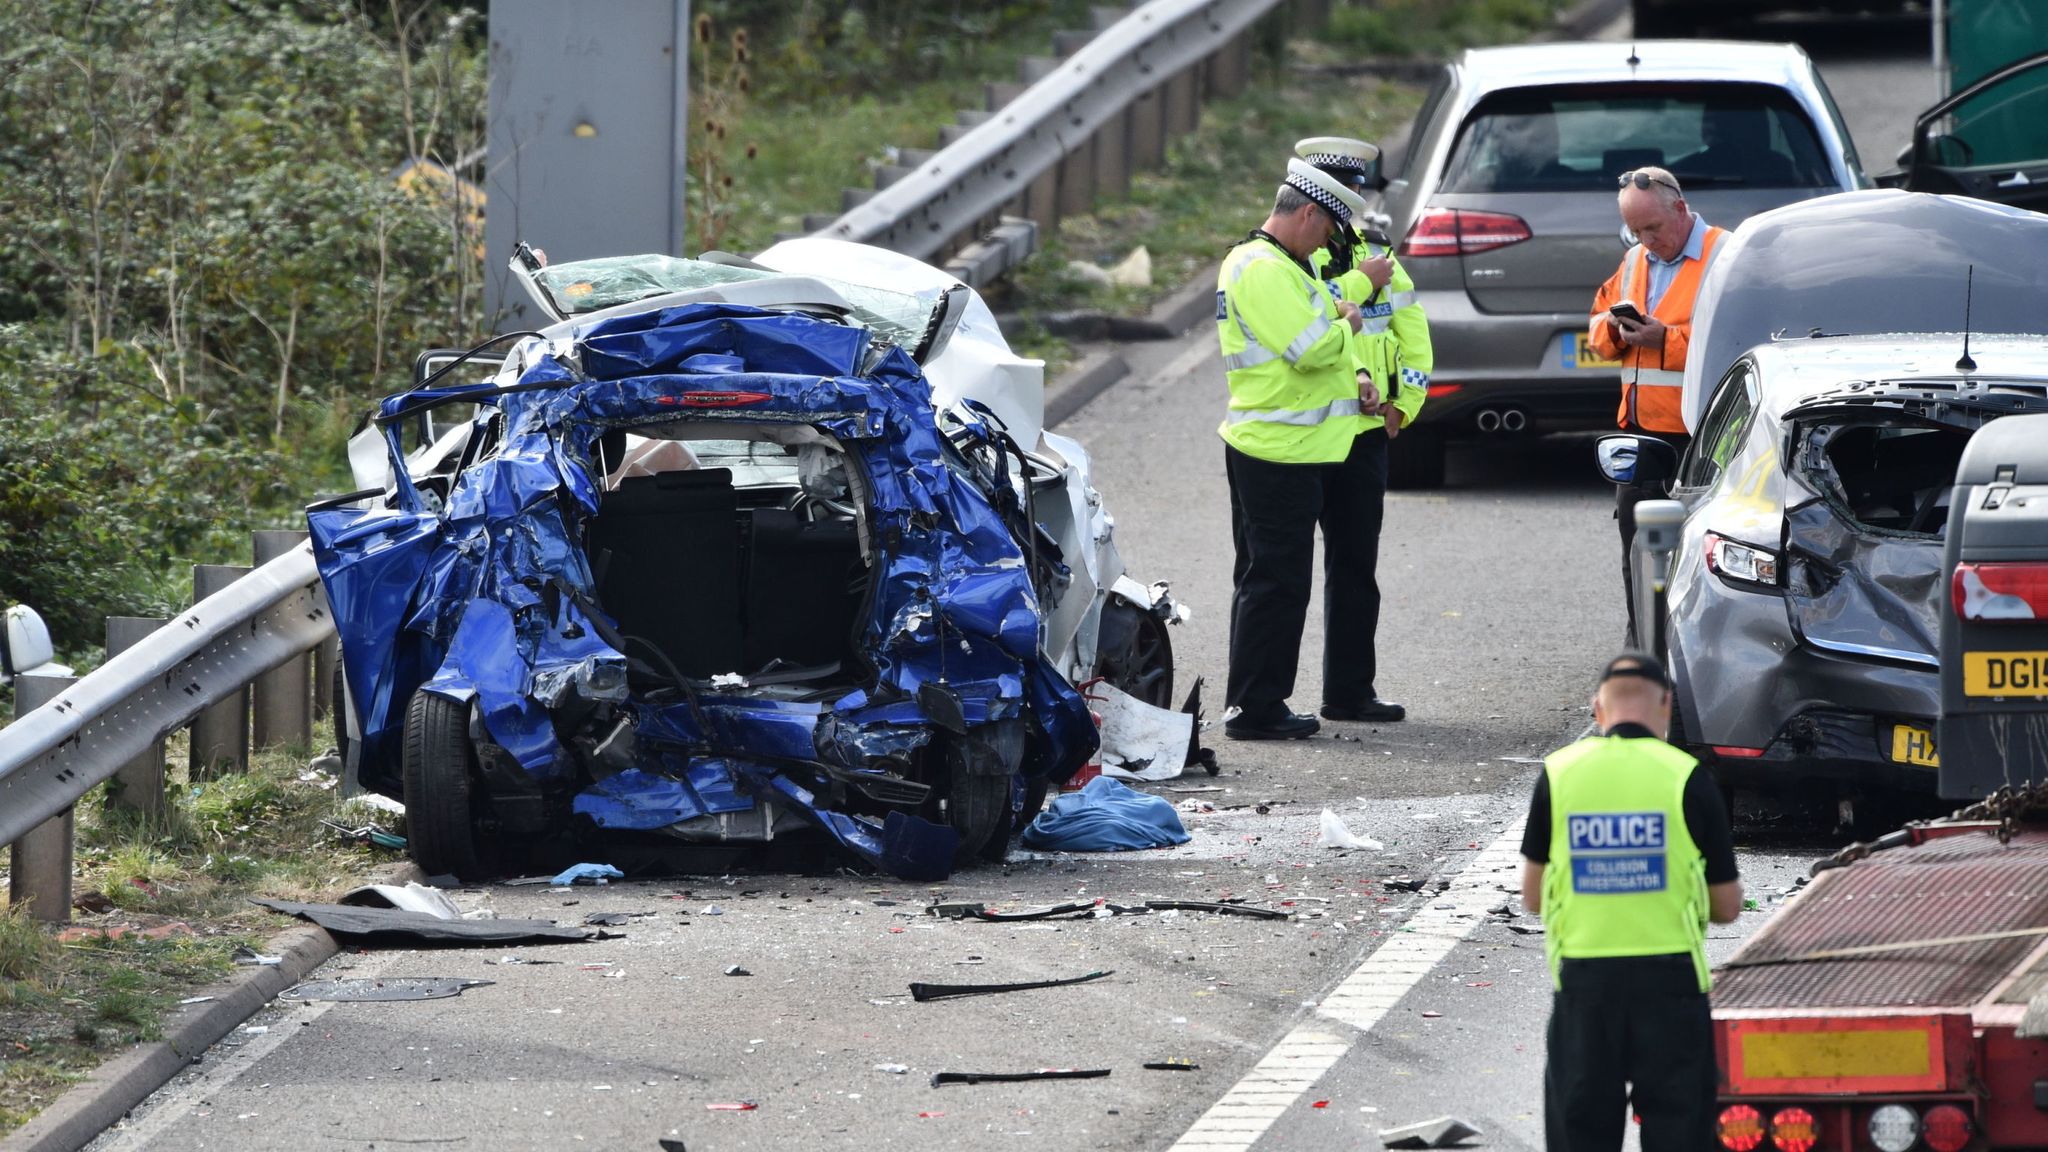 Emergency services at the scene of an accident on the M5 motorway near Taun...